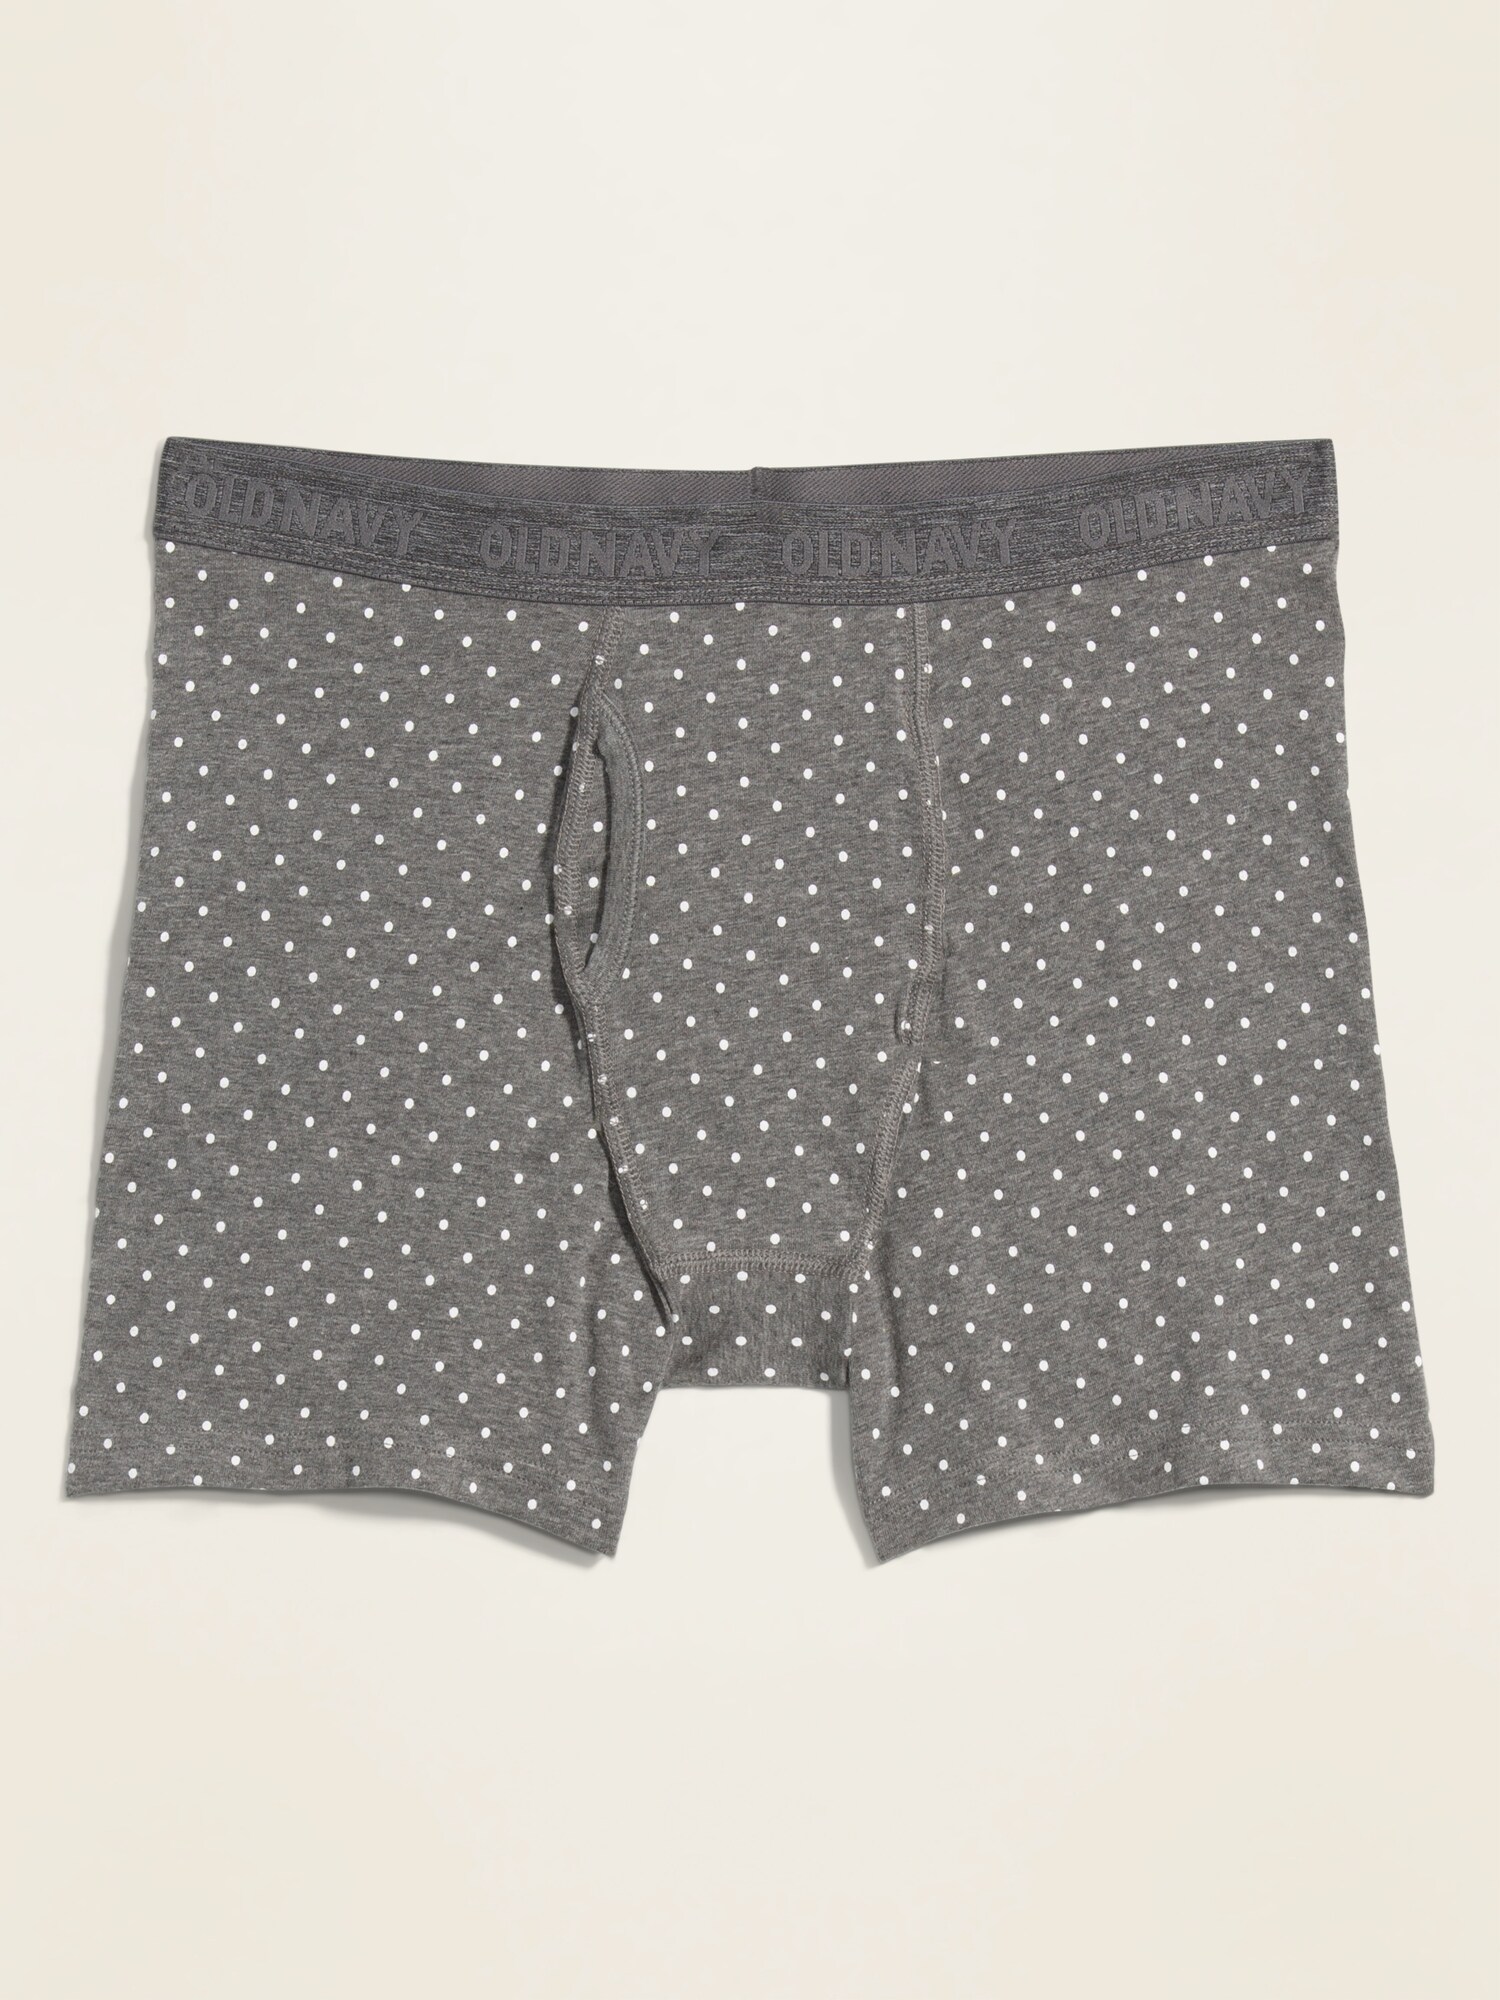 Soft-Washed Printed Boxer Briefs for Men -- 6-inch inseam